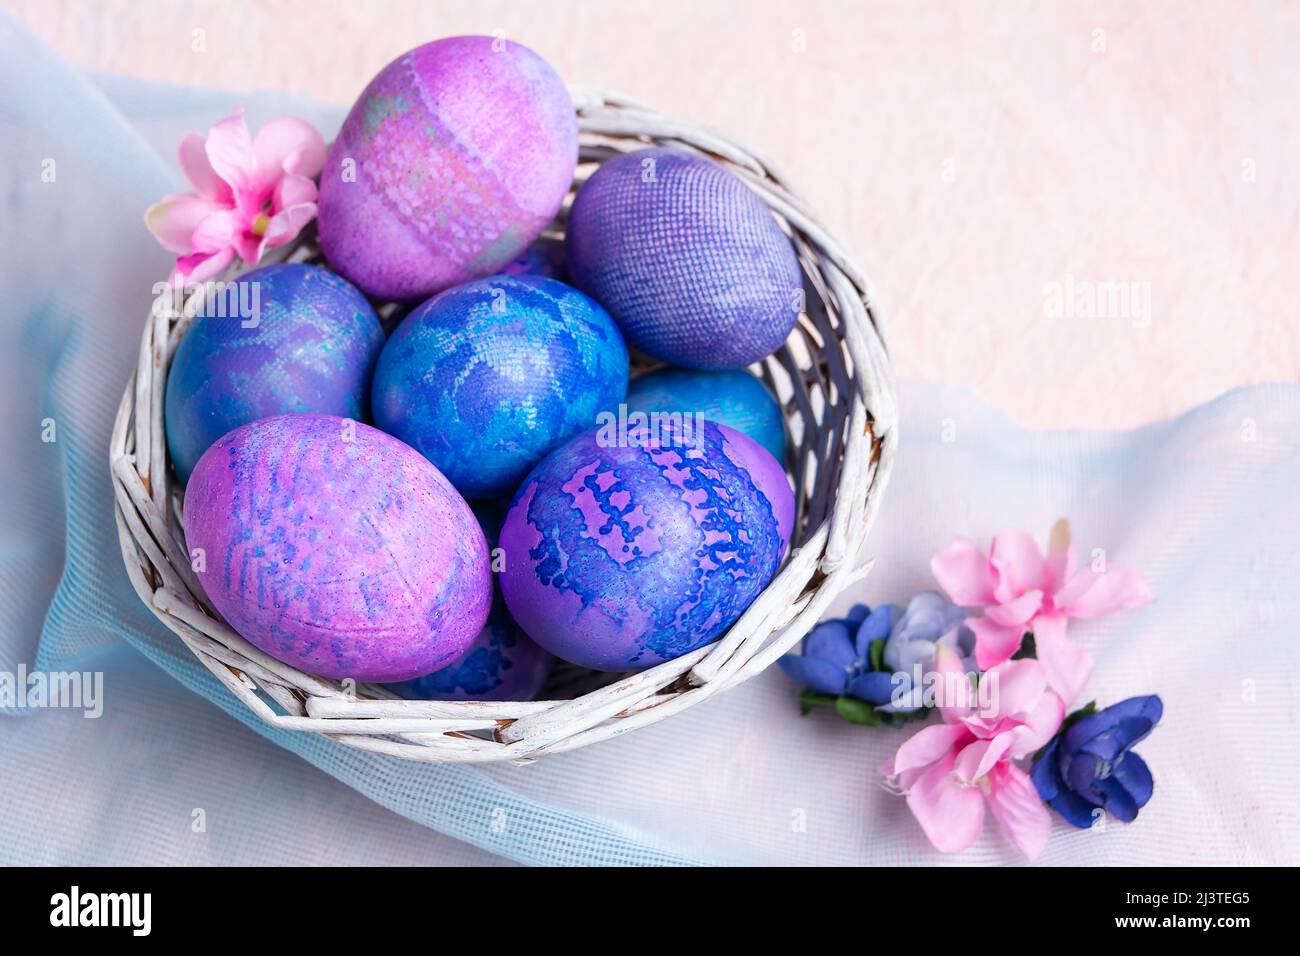 Purple and blue Easter eggs in bowl on a pastel background. Stock Photo